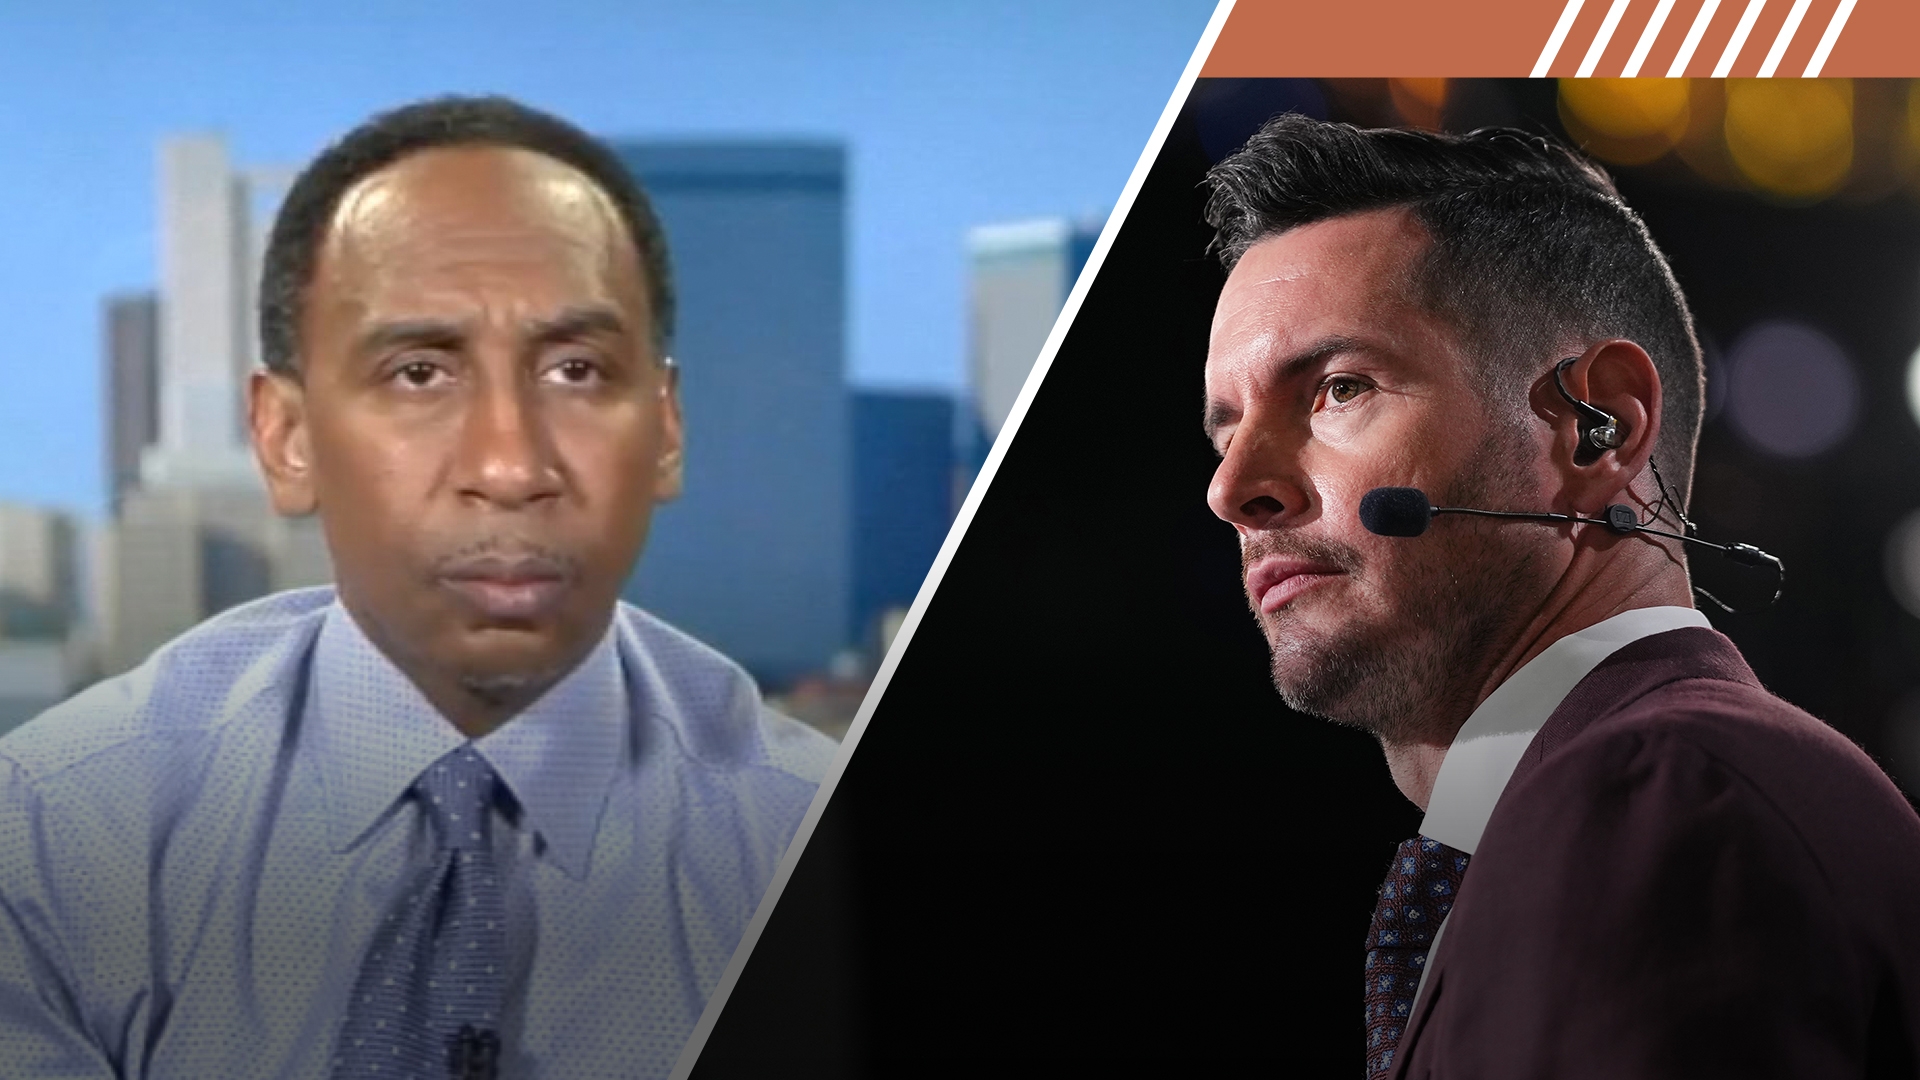 Was Lakers' plan to hire JJ Redick all along? Stephen A. weighs in